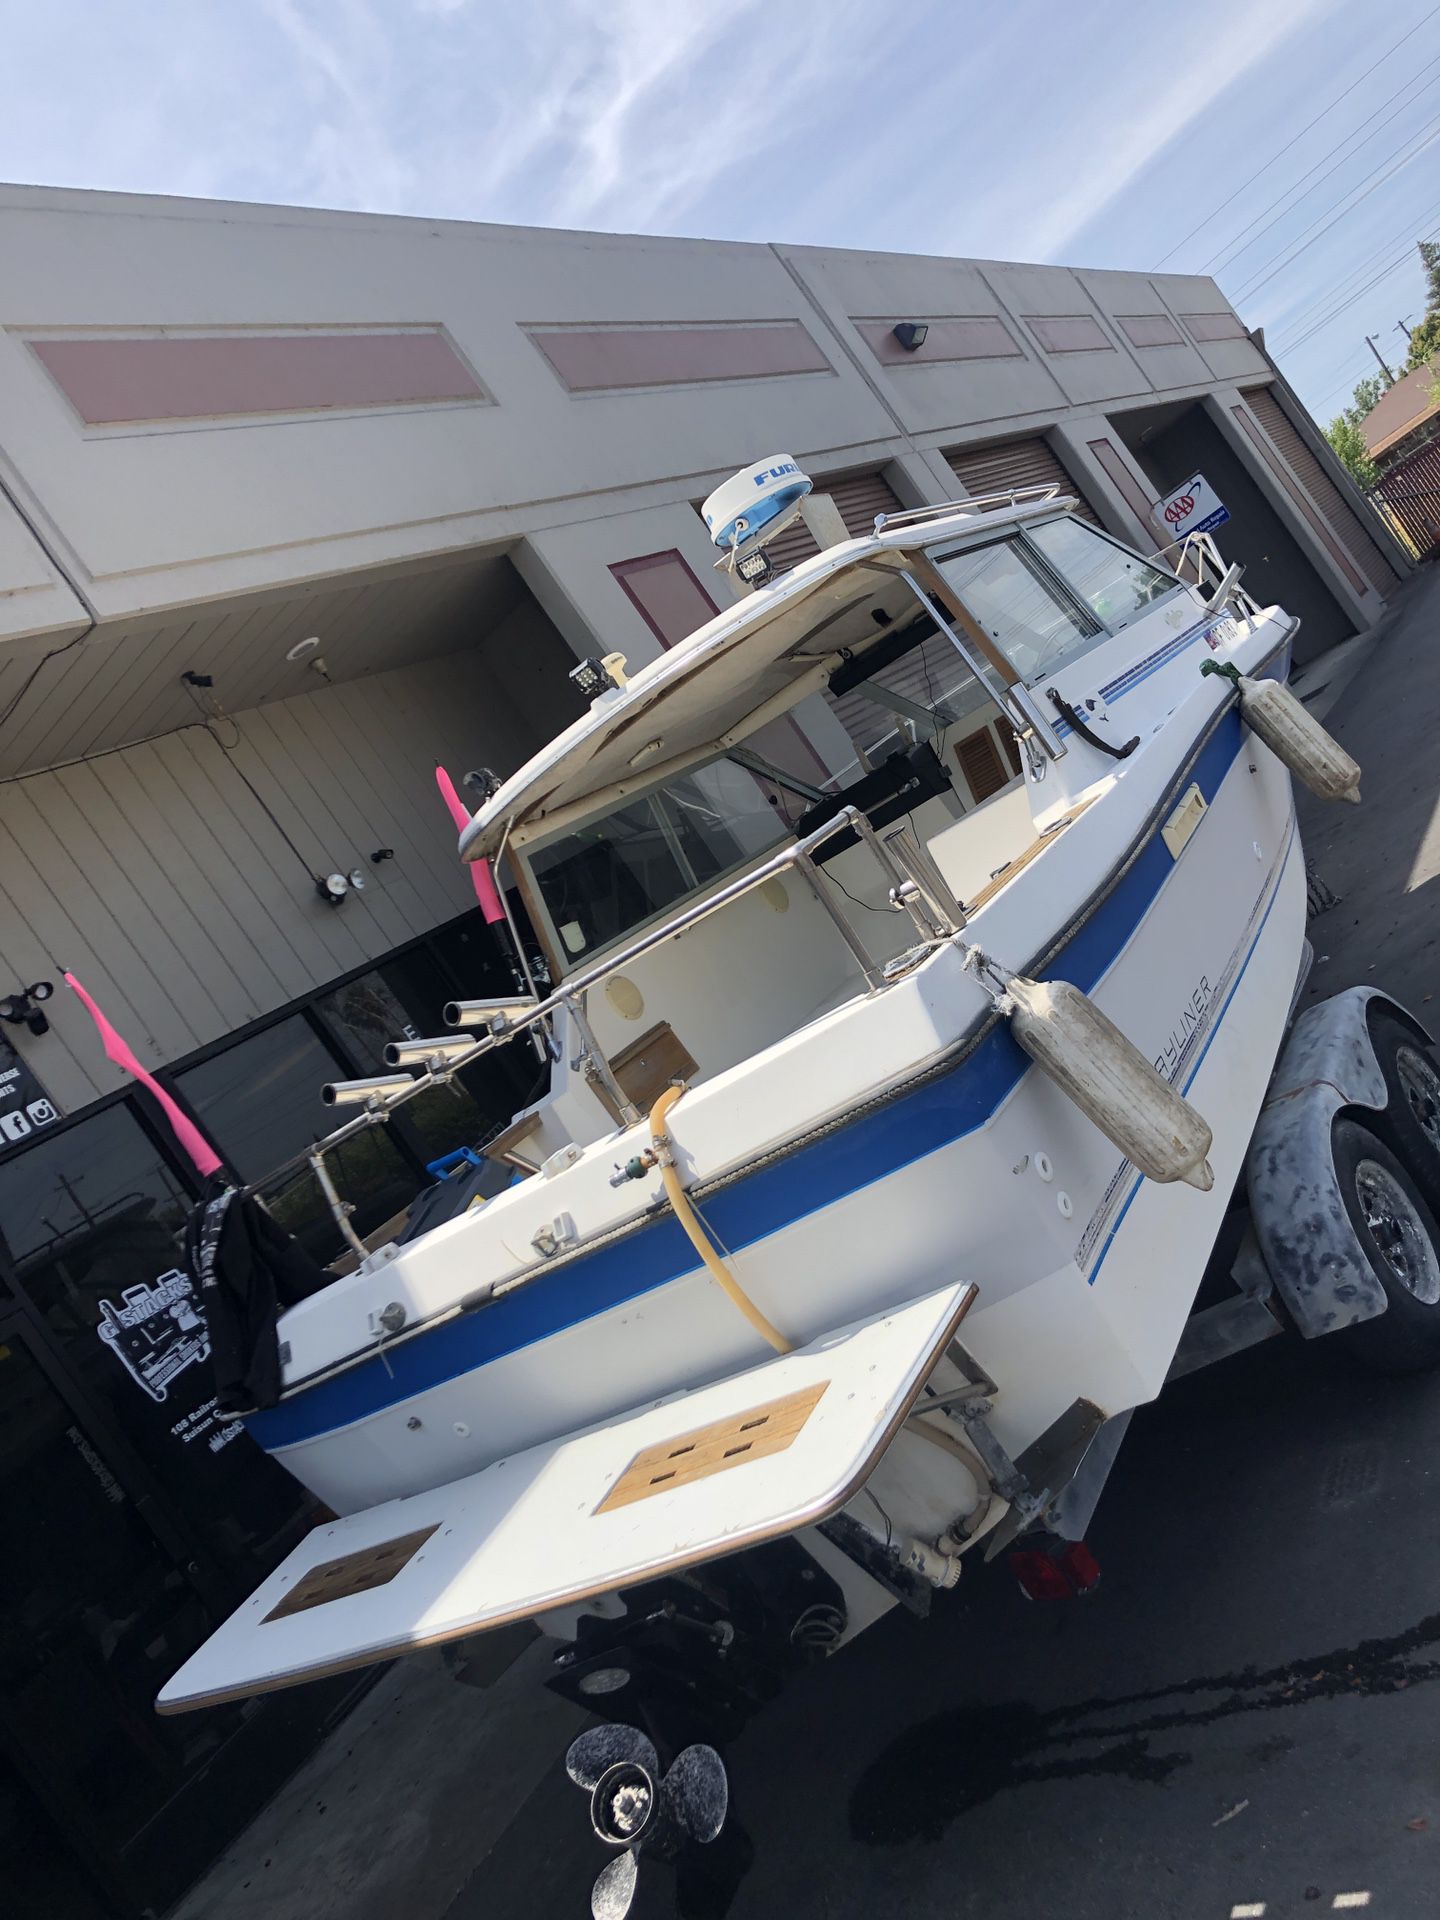 1989 bayliner trophy one owner boat has been in our family for over 30 years. Has Mercruiser inboard self cooling system motor was rebuilt by D and